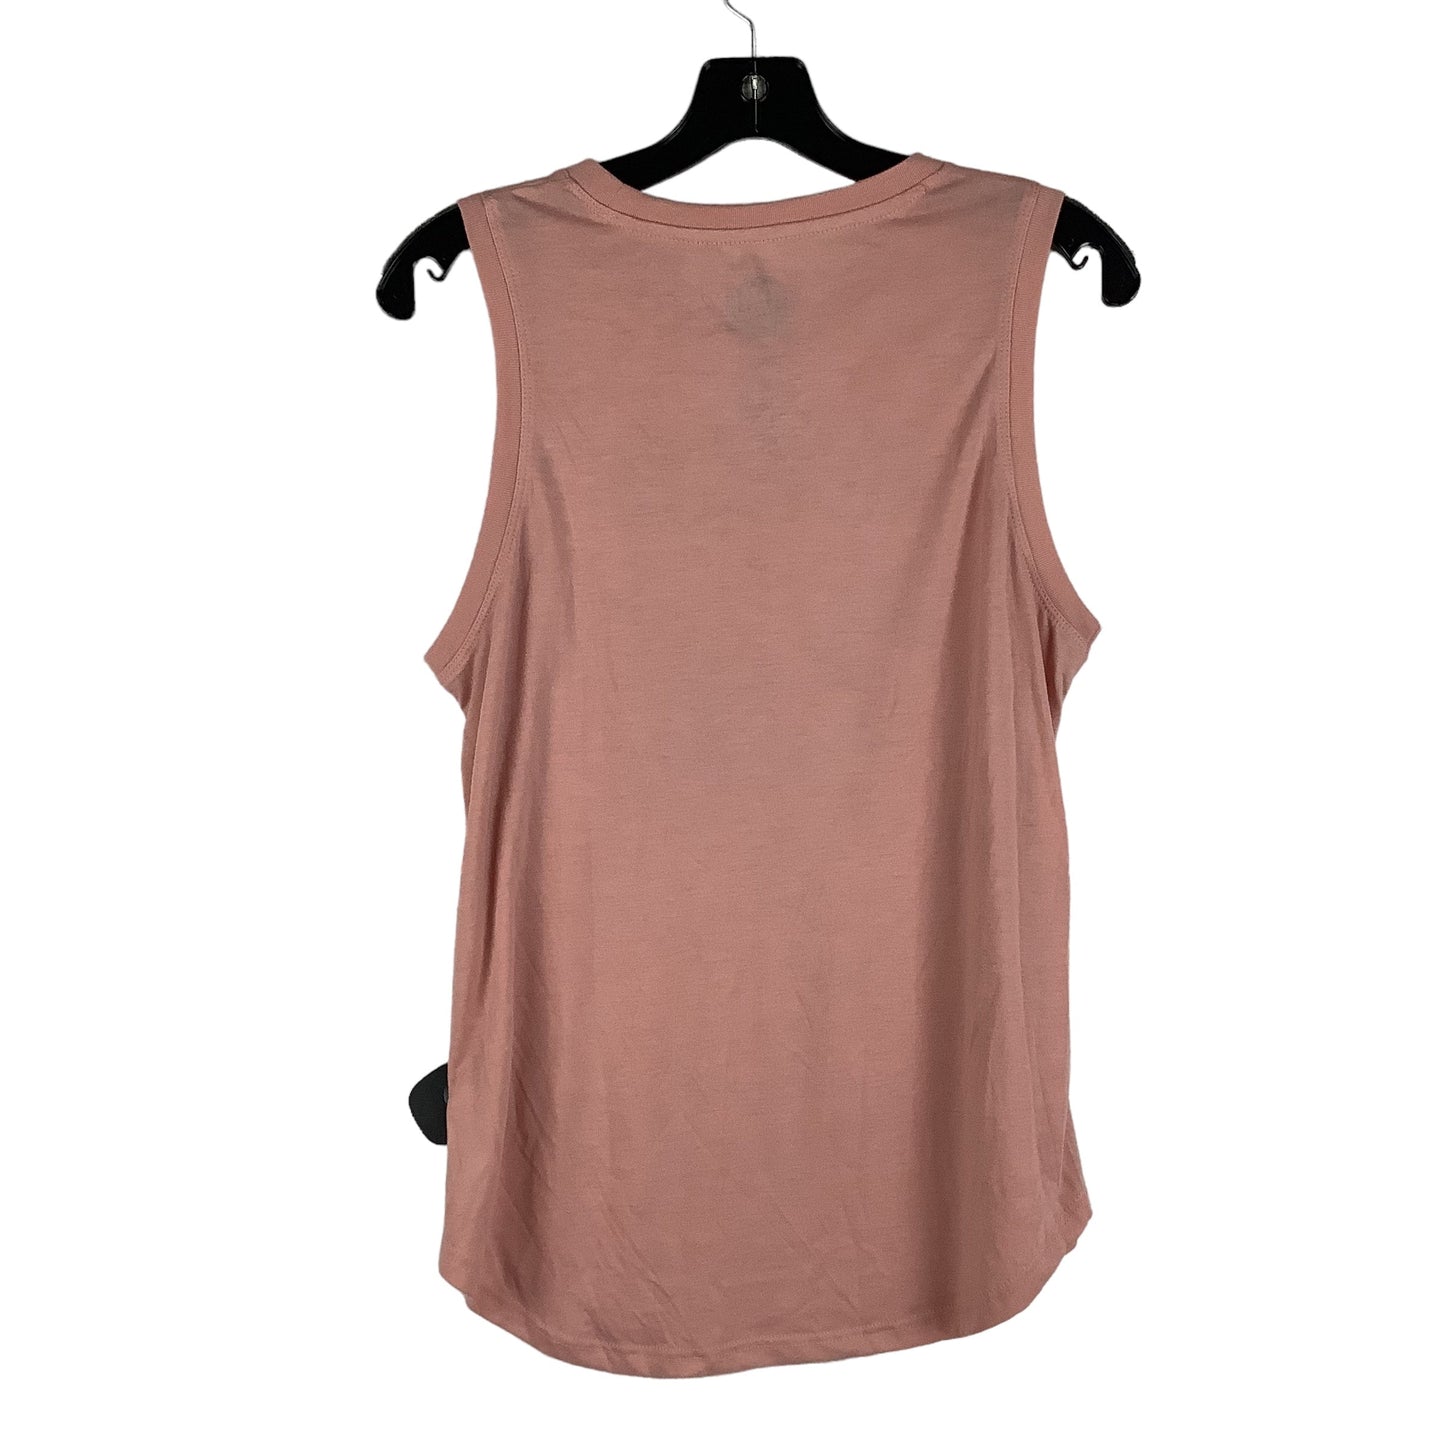 Pink Top Sleeveless Basic Clothes Mentor, Size M